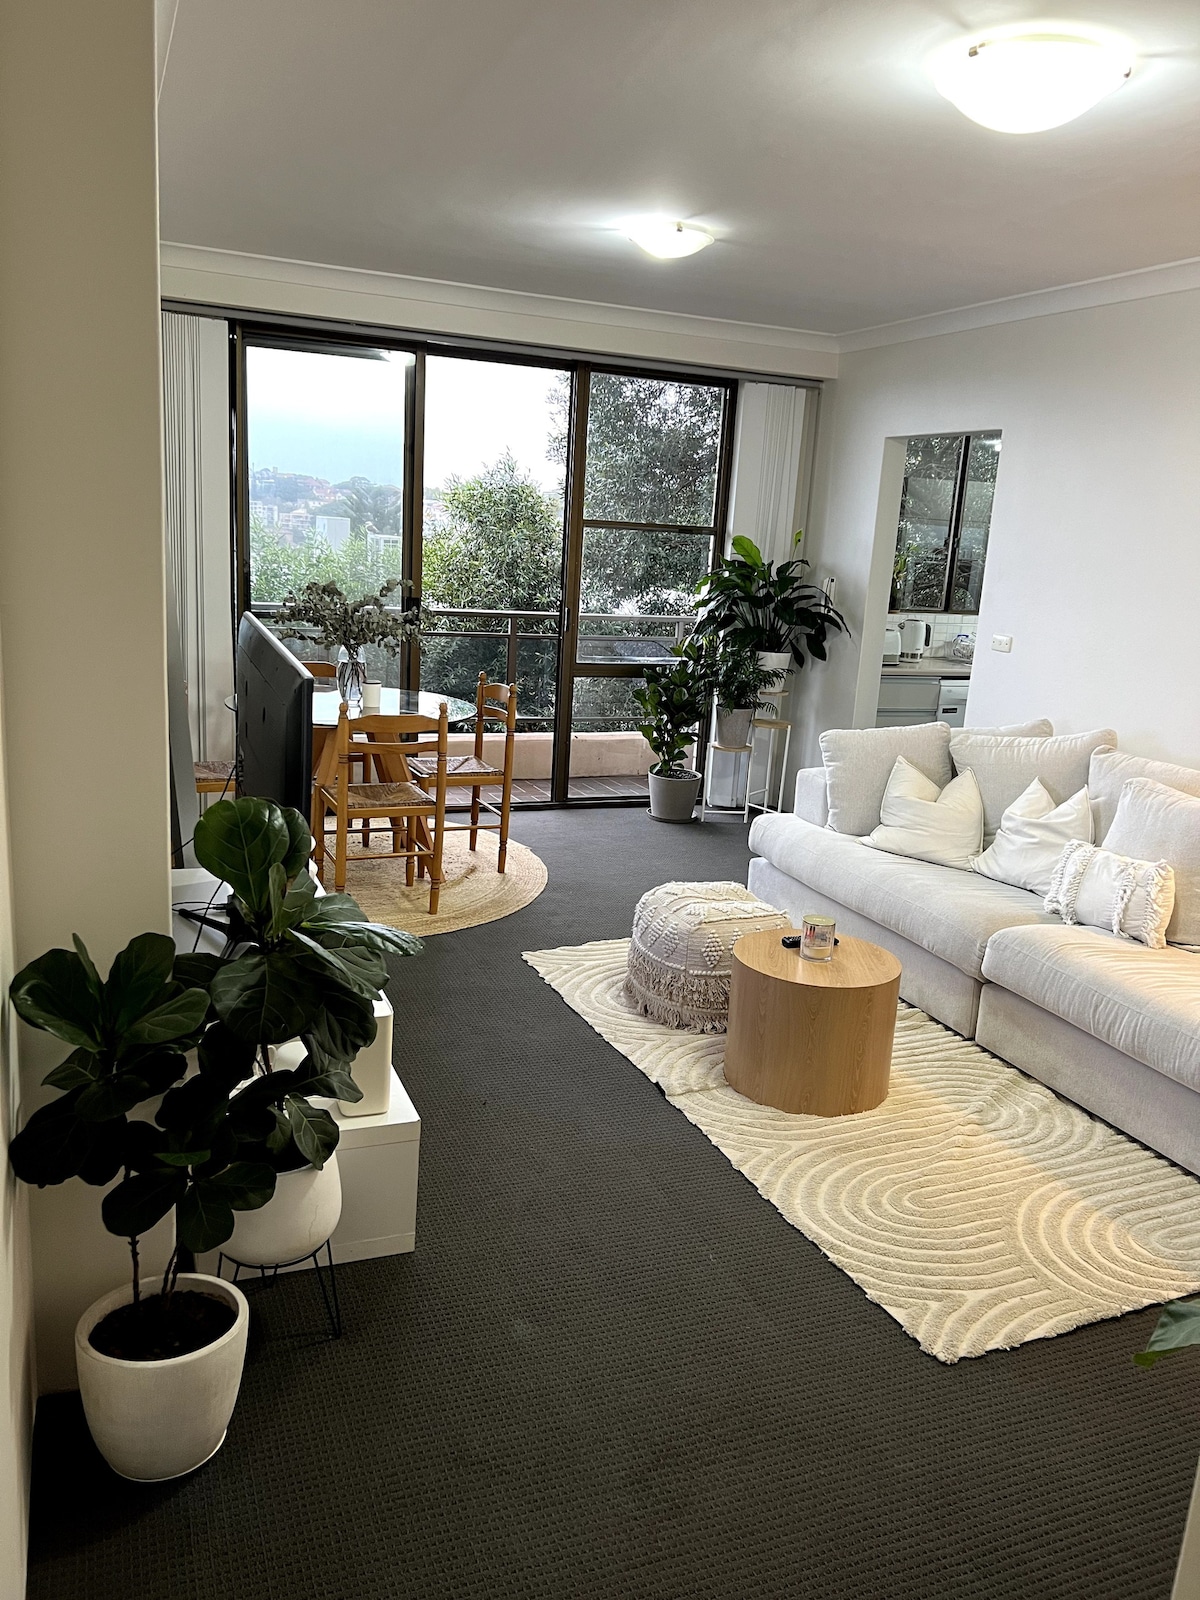 Queen room in Coogee - Bright, spacious &
homely